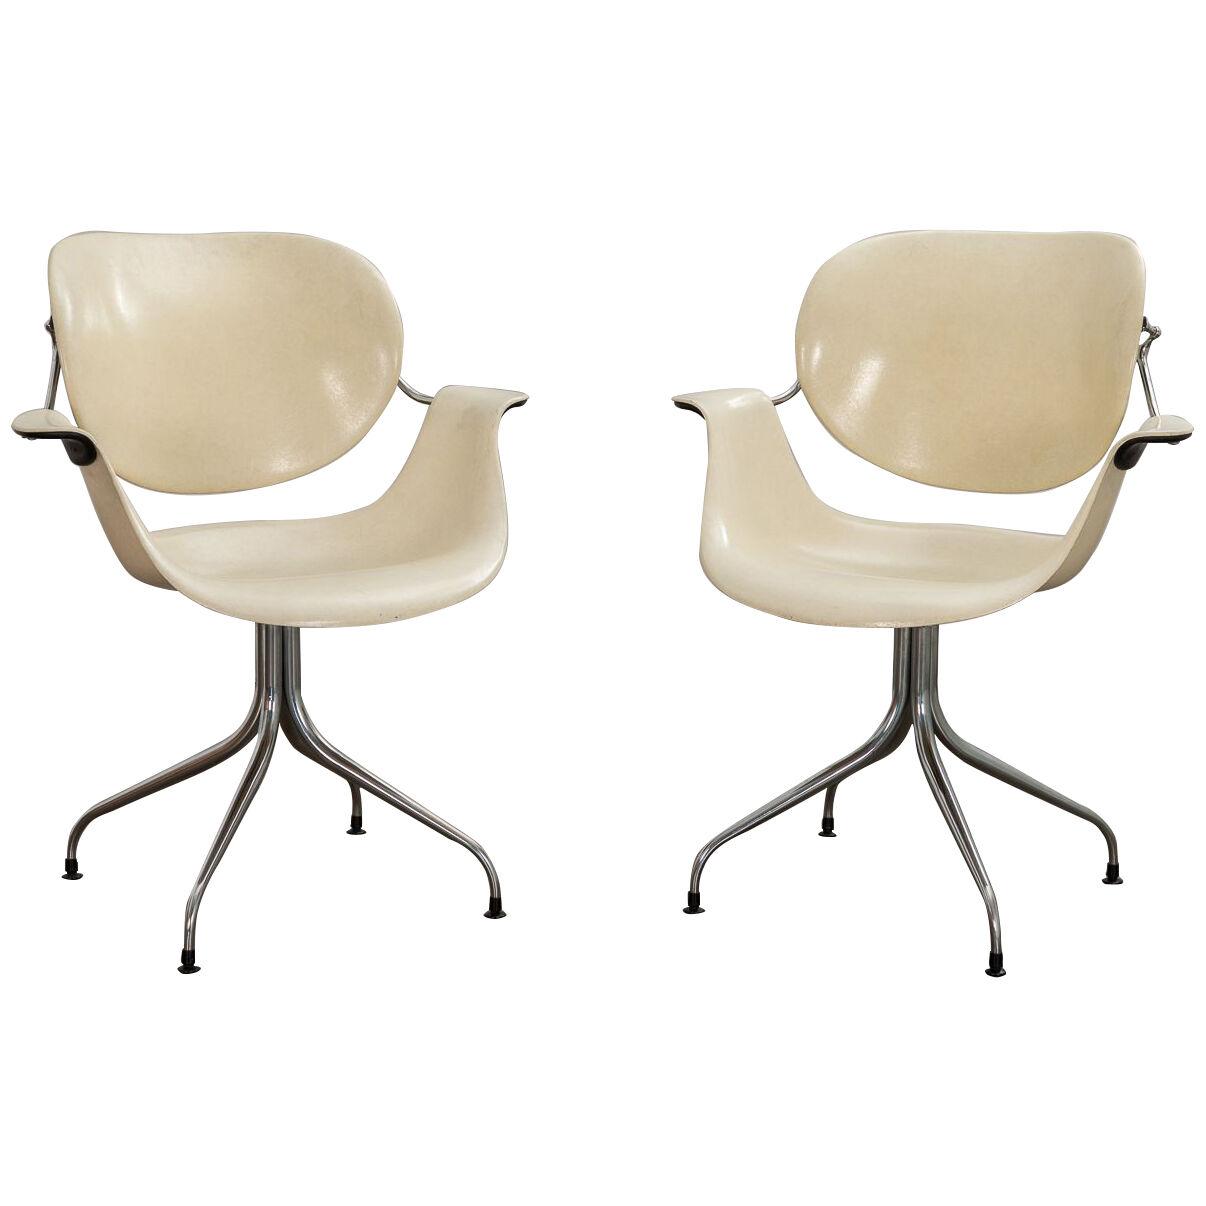 Pair of George Nelson MAA Swag Leg Chairs